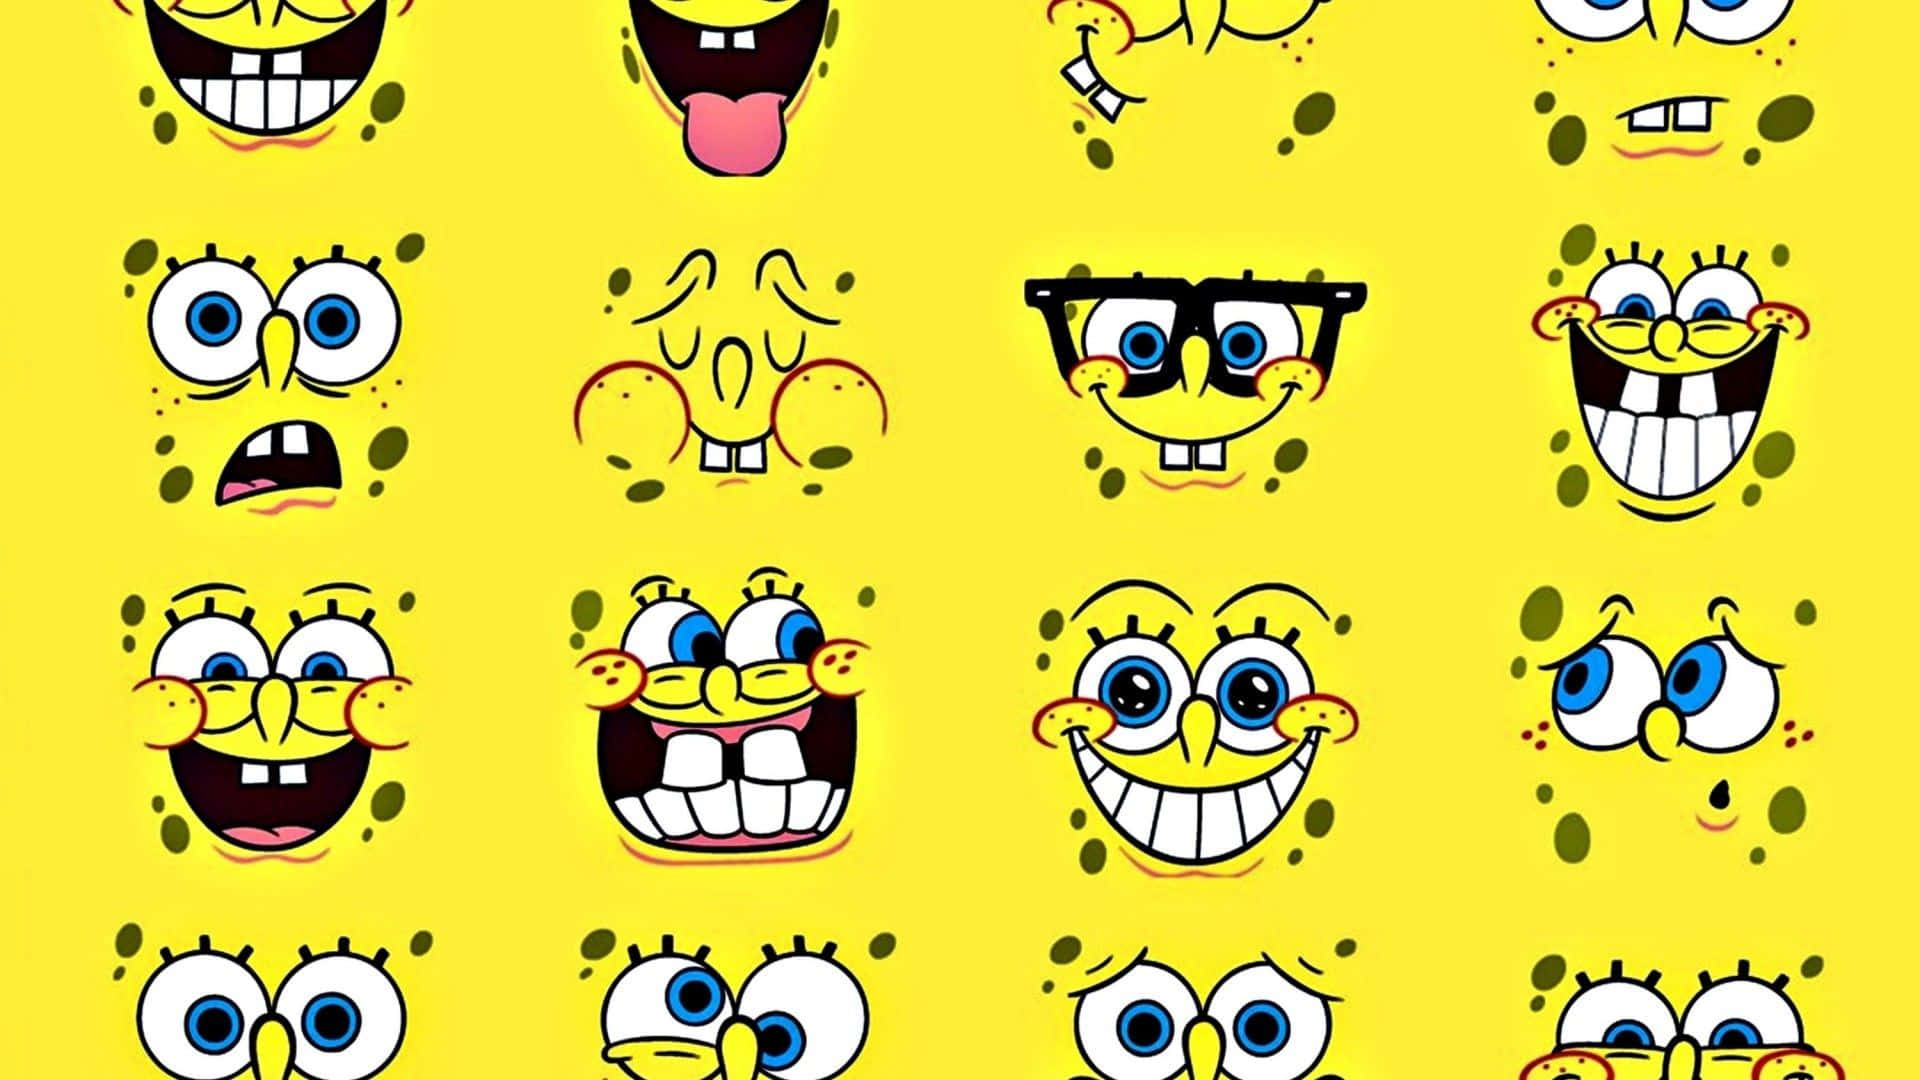 A funky and aesthetically pleasing wallpaper of Spongebob Squarepants